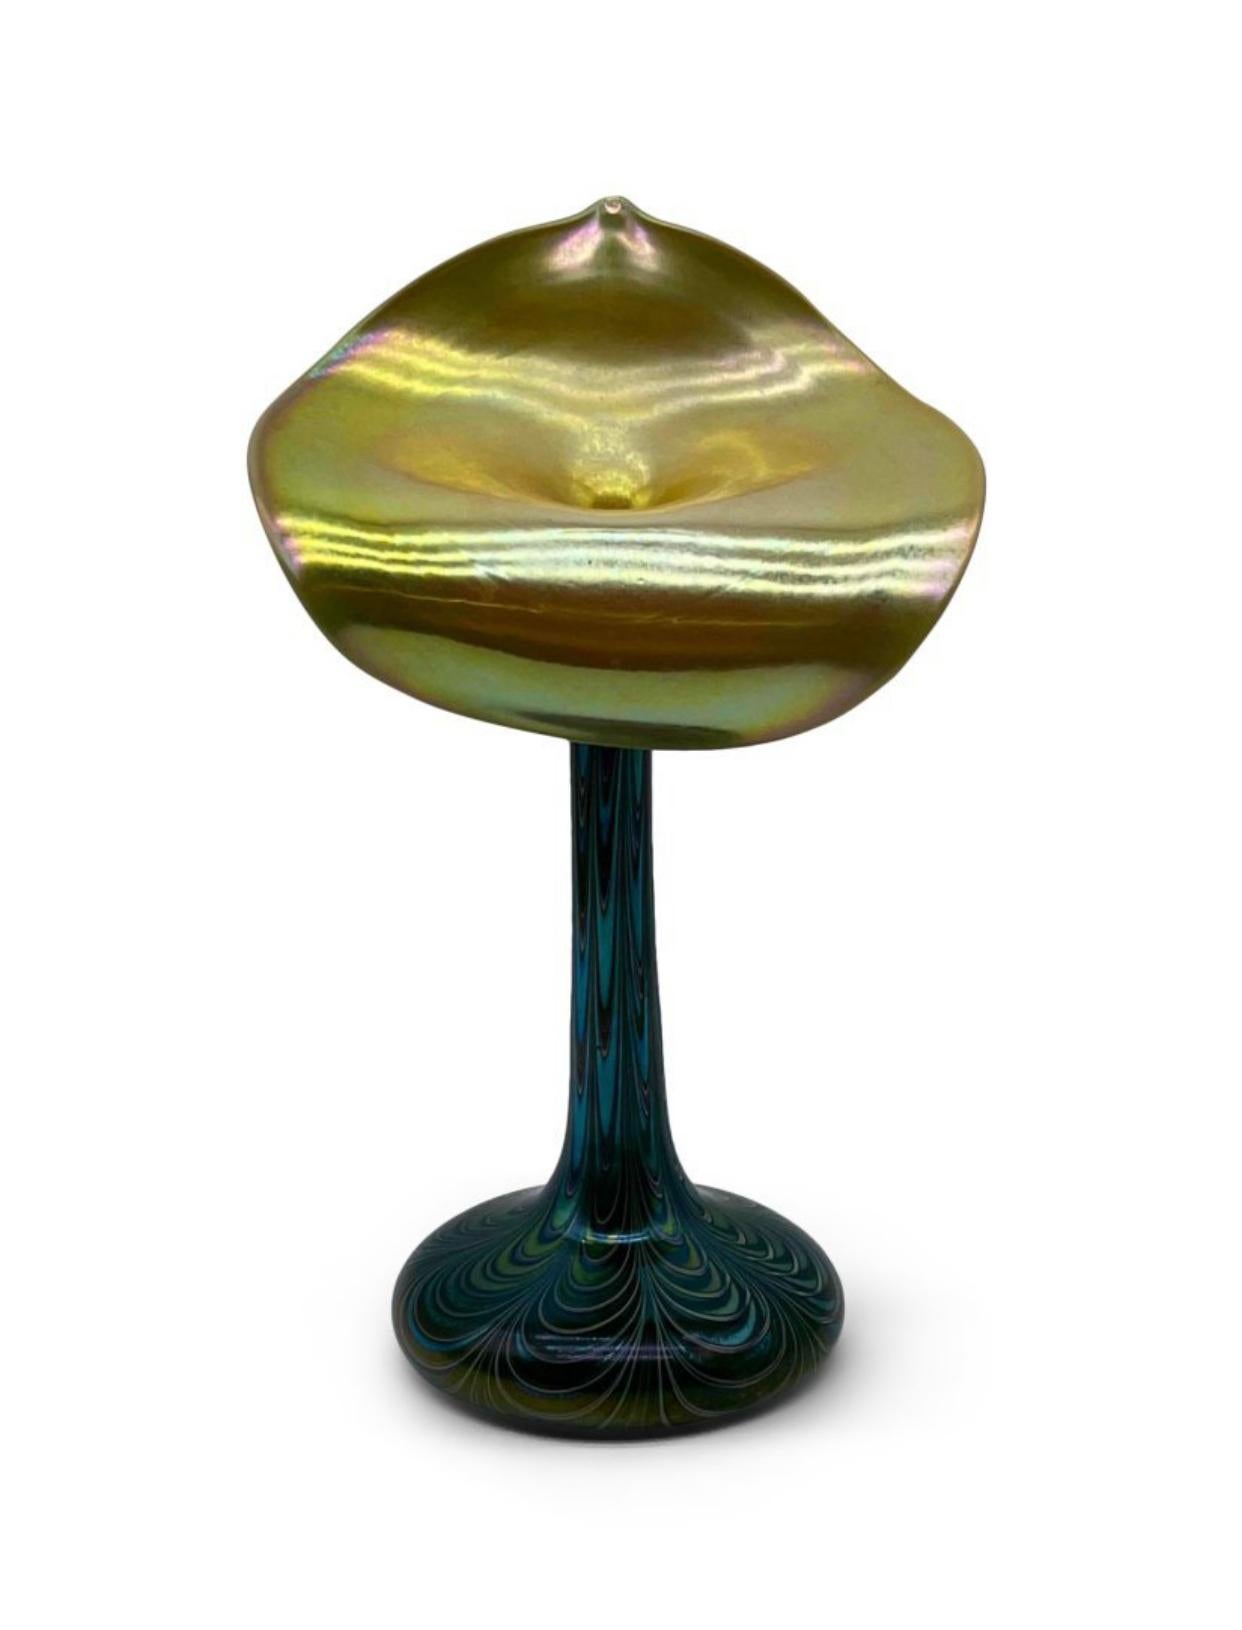 Outstanding iridescent pulled feather art glass Jack in the Pulpit vase by the renown glass artists at Orient & Flume. 
The front features a beautiful and vibrant iridescent gold. The base, neck and back  feature the intricate pulled feather method